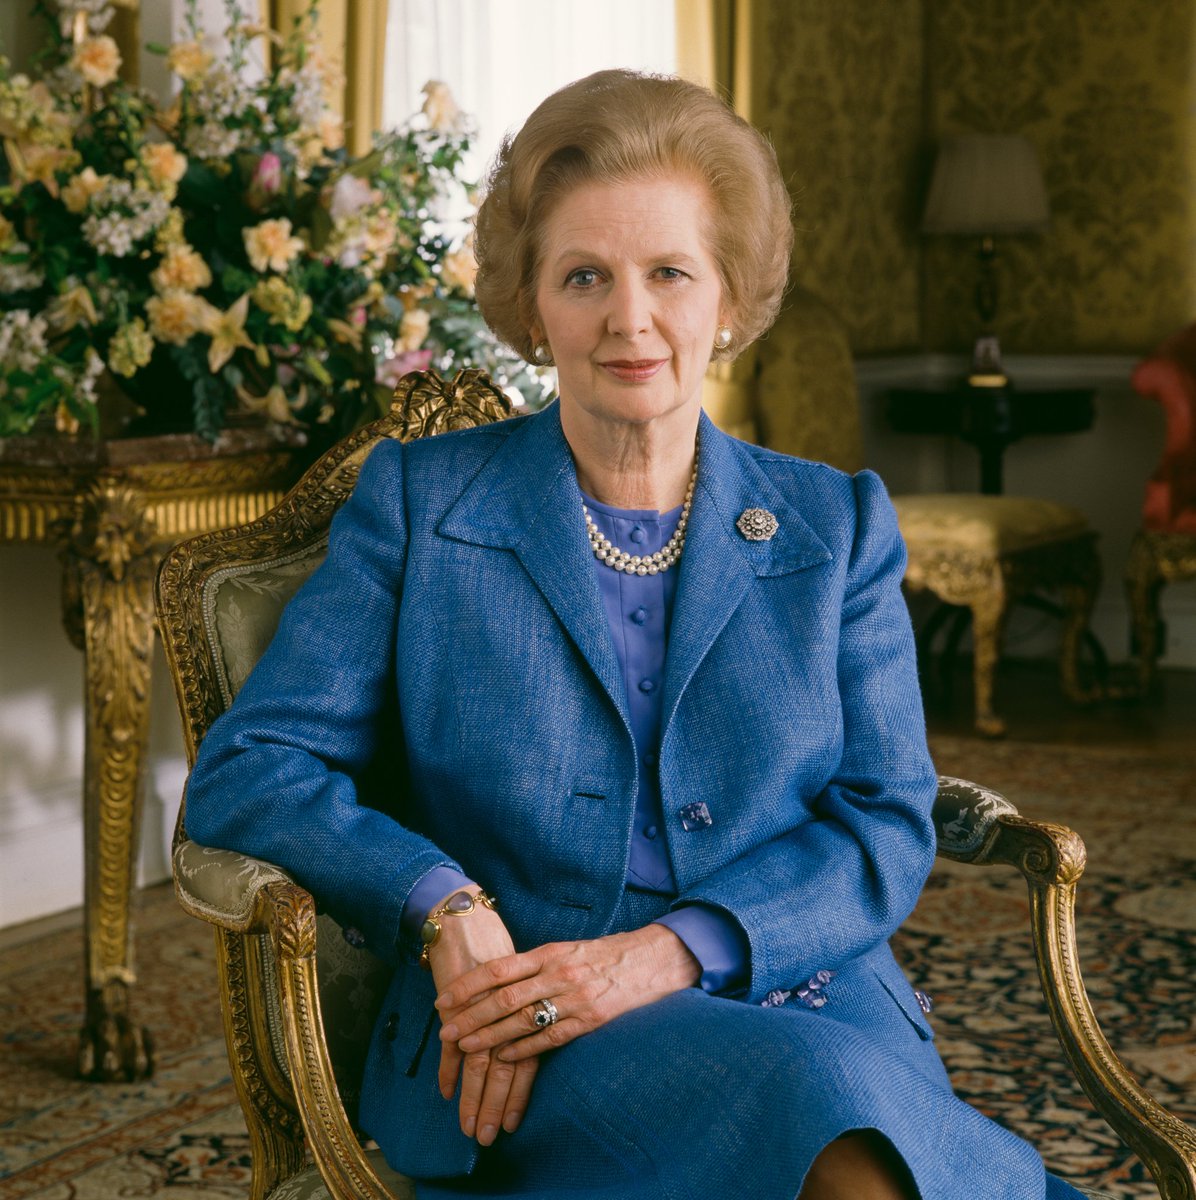 British politician #MargaretThatcher died from a #stroke #onthisday in 2013. #stateswoman #barrister #trivia #chemist #PrimeMinister #TheIronLady #Thatcherism #BaronessThatcher #Thatcher #TheRightHonourable #Parliament